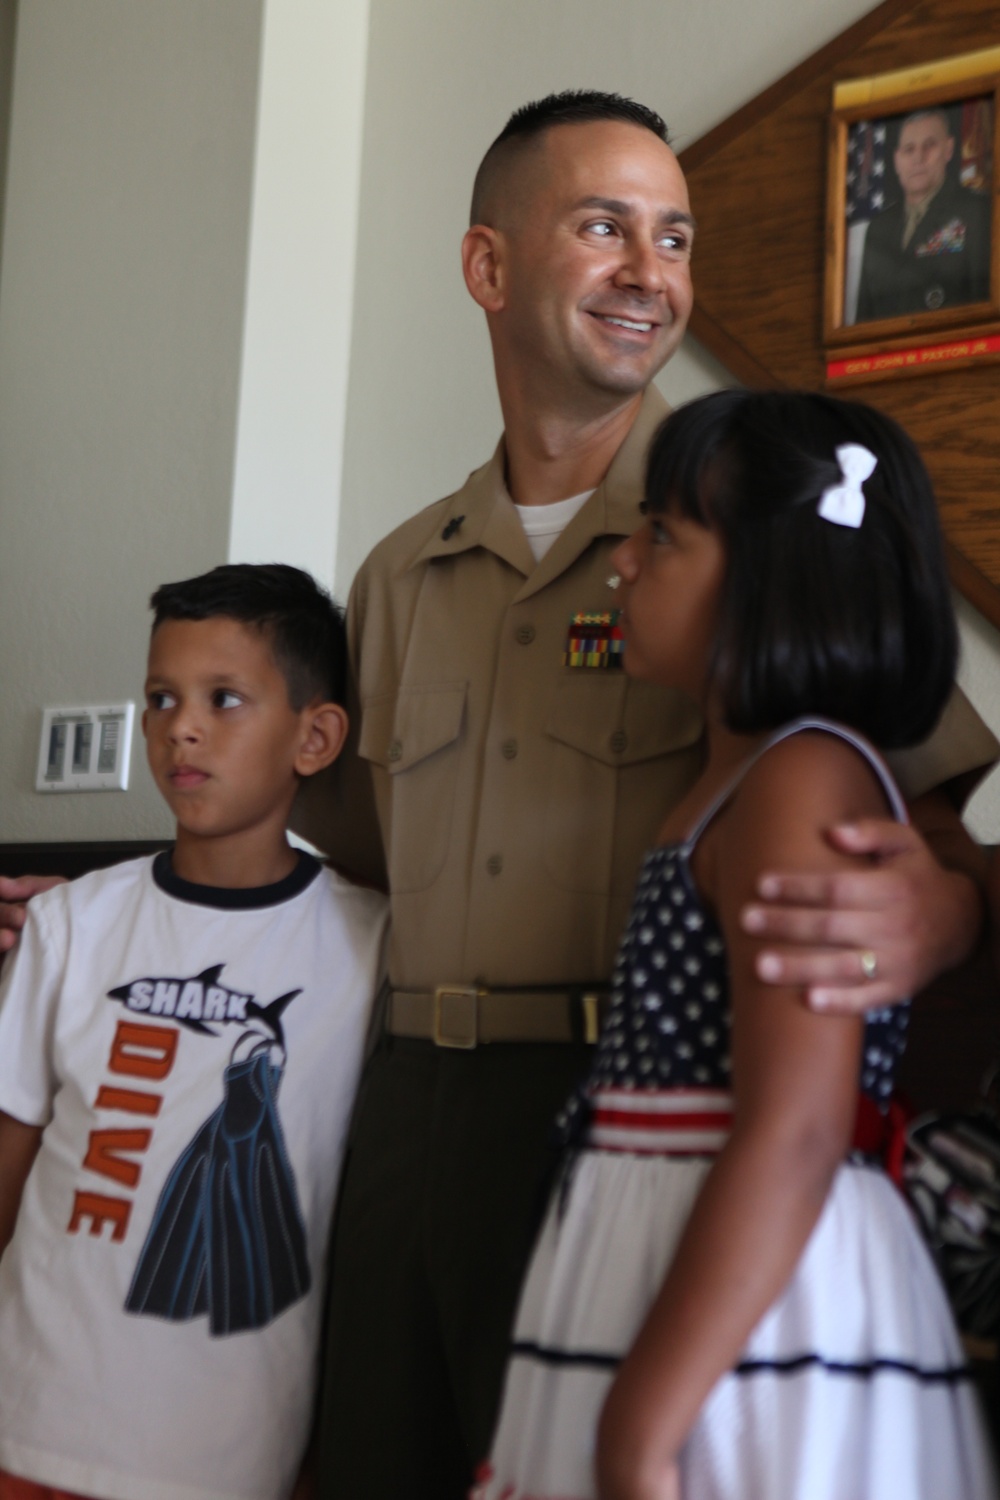 Nothing keeps him away: Military Dad goes extra mile for family